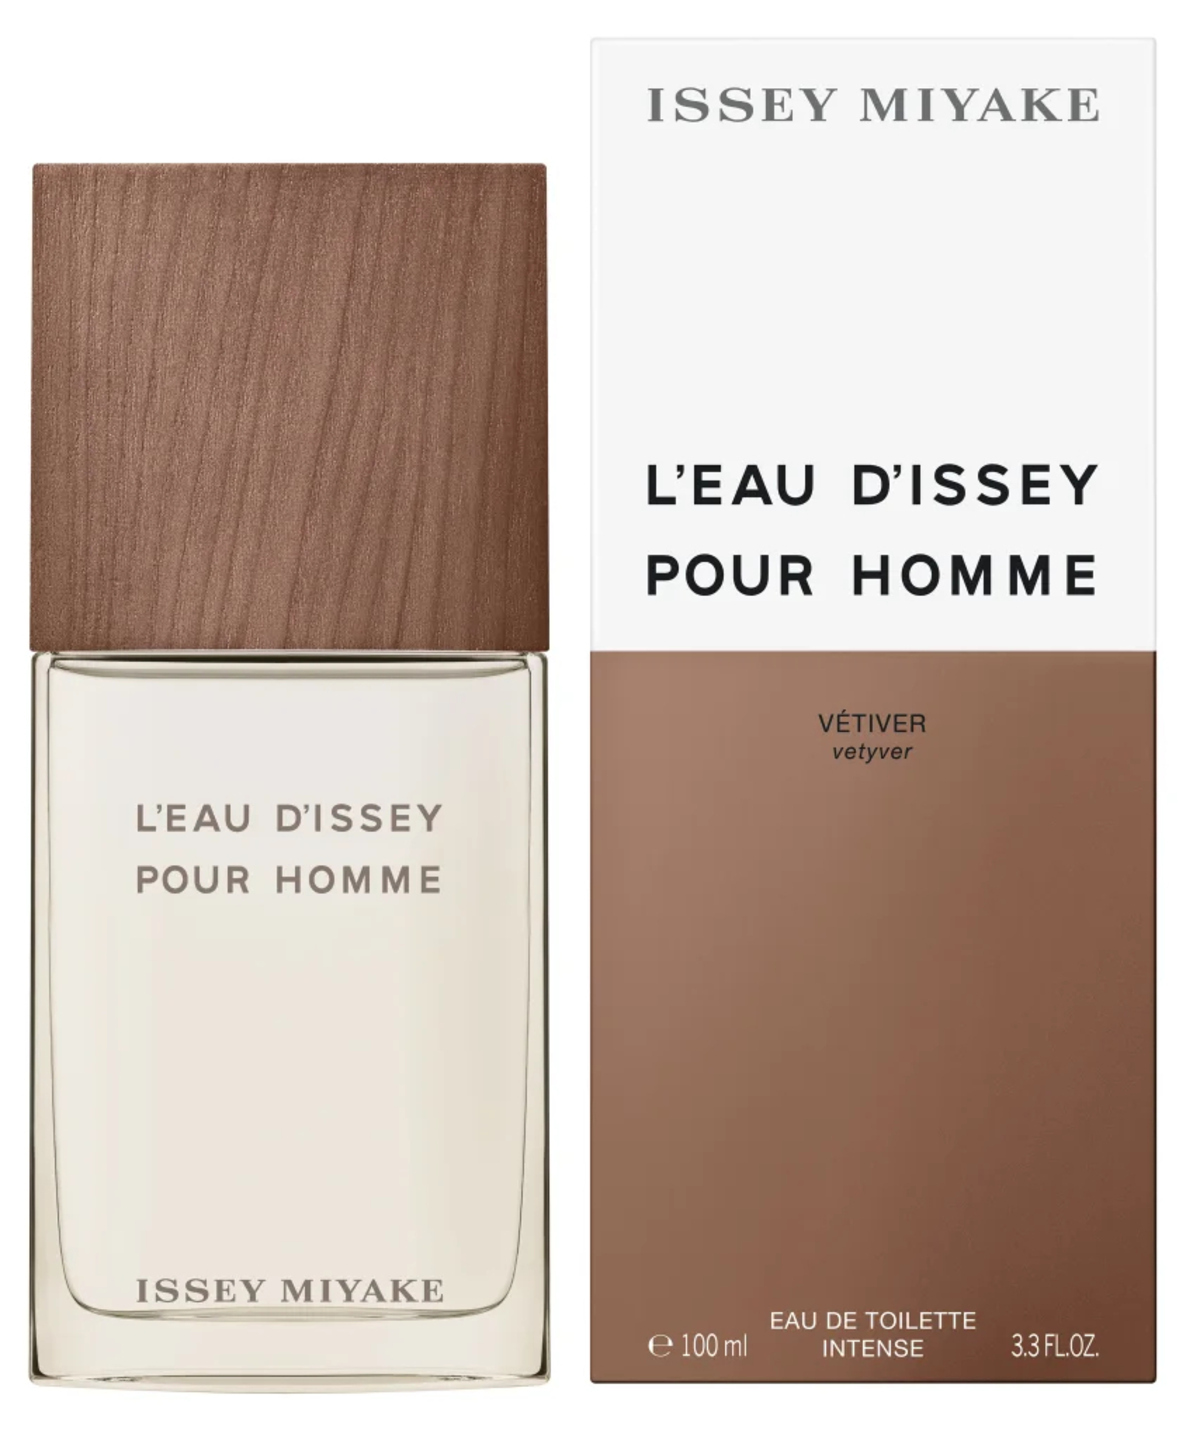 L'Eau d'Issey pour Homme Vétiver - Issey Miyake